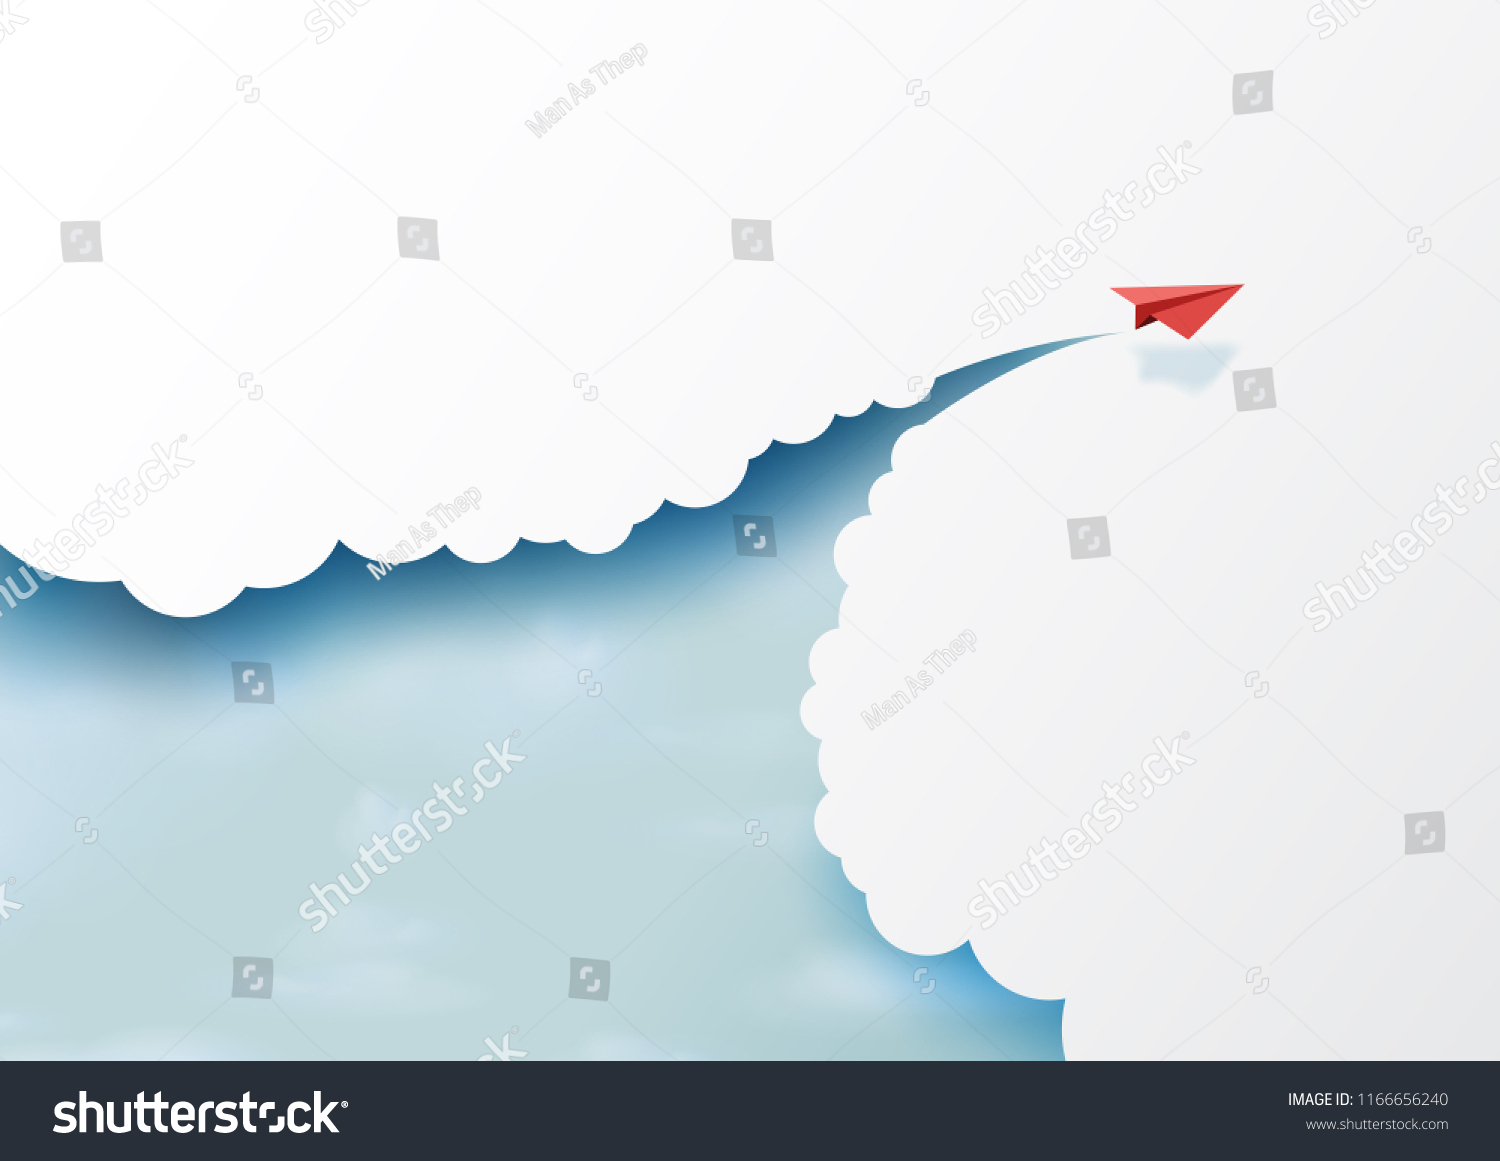 Red paper airplanes flying on blue sky and cloud.Paper art style of business success and leadership creative concept idea.Vector illustration #1166656240